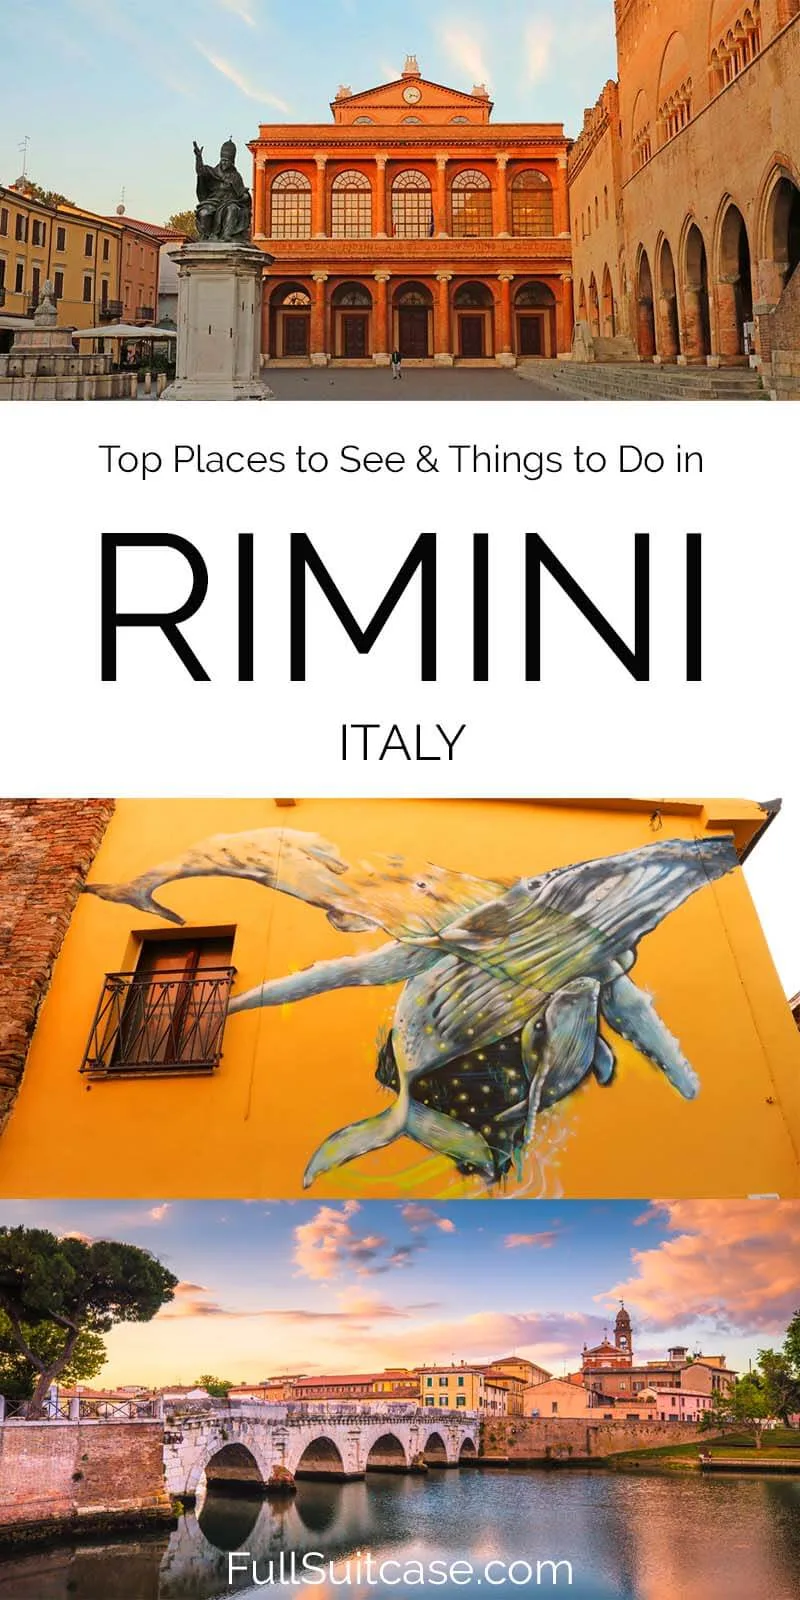 Rimini, Italy - top sights and things to do in Rimini